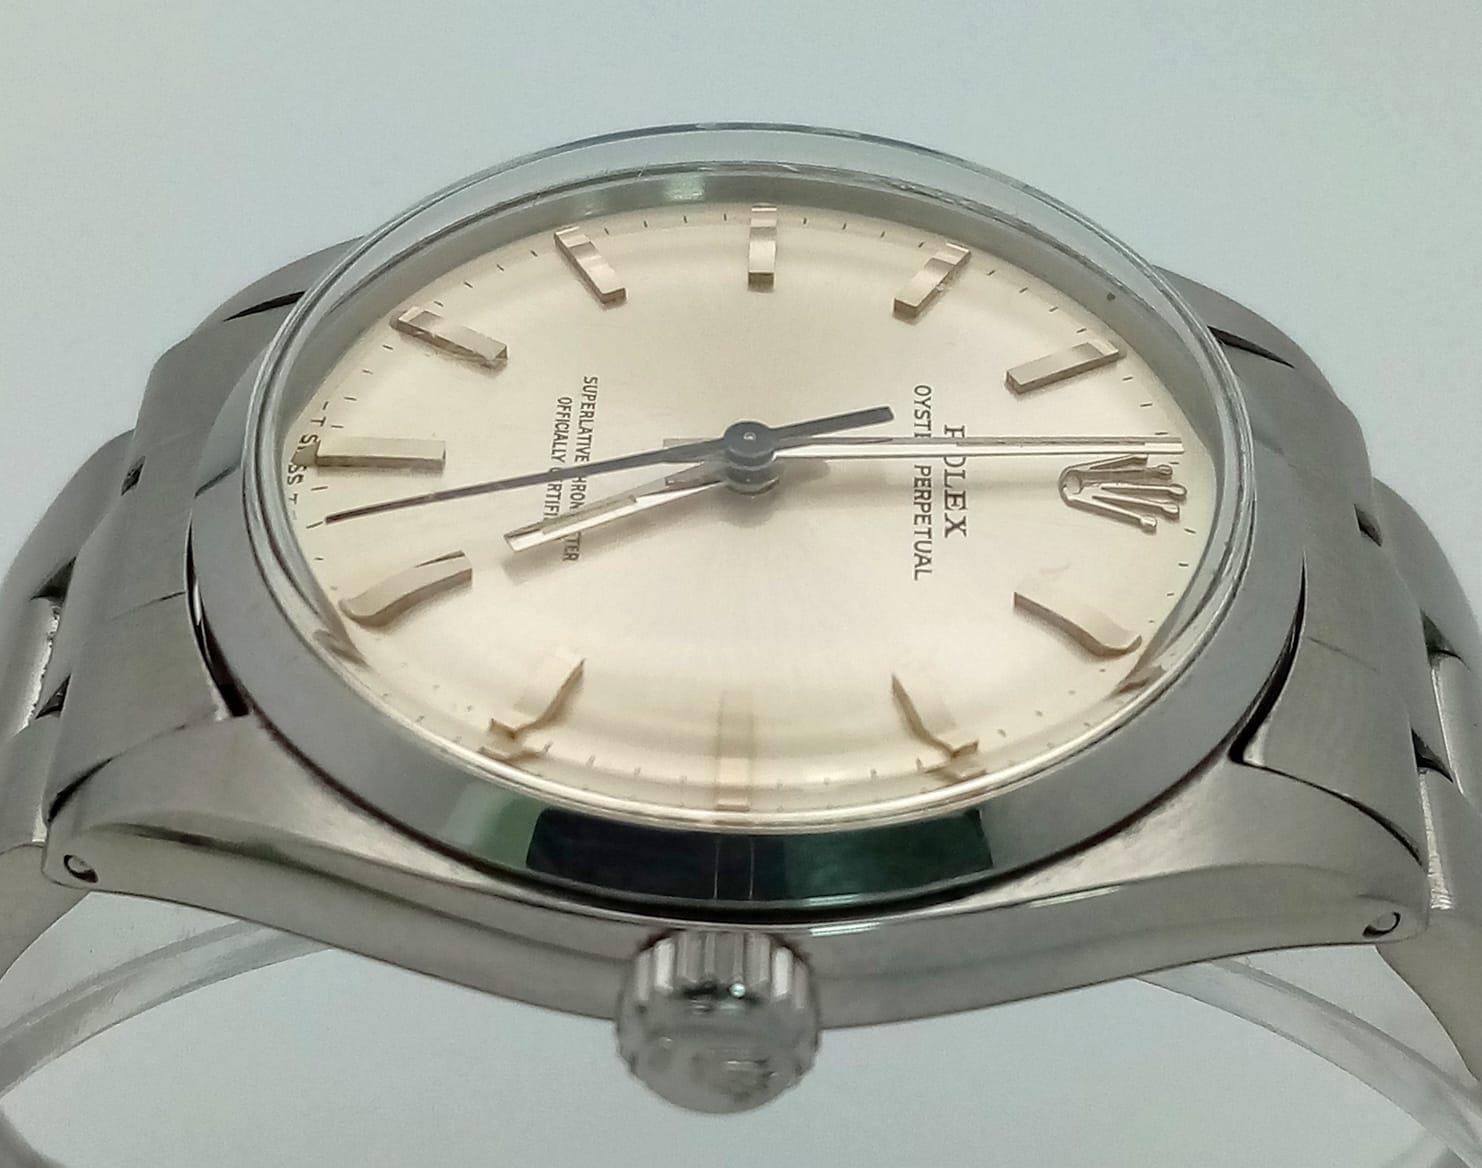 A Vintage Rolex Oyster Perpetual Gents Watch. Stainless steel bracelet and case - 34mm. Automatic - Image 5 of 9